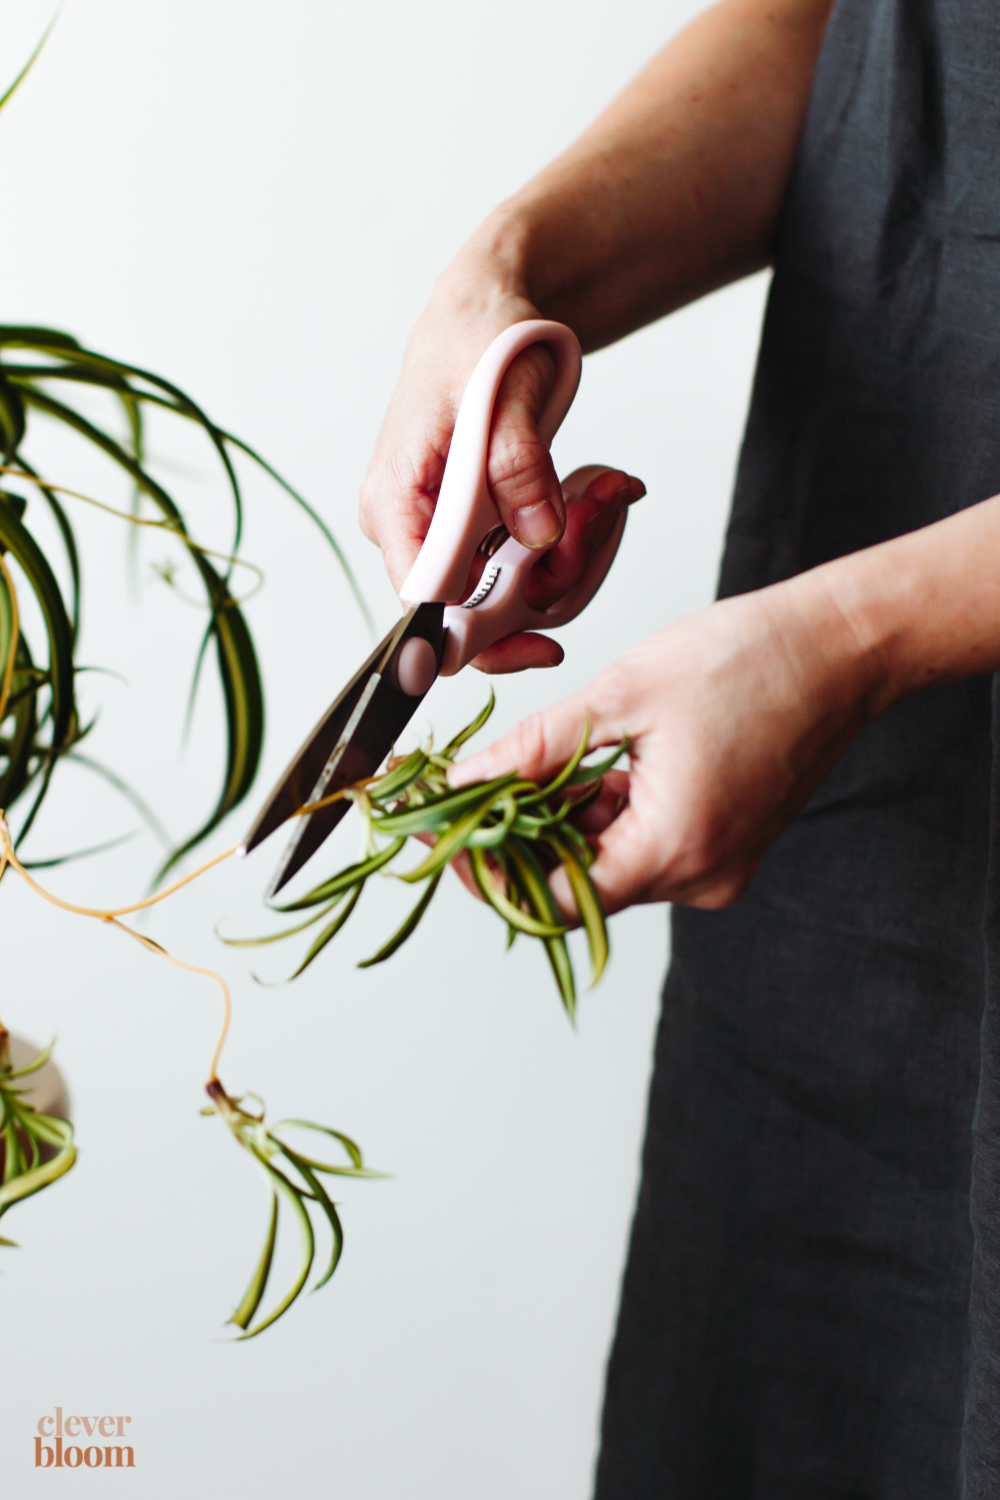 Propagating plants is a fun way to make new plants for yourself, or to give away to friends. Learn how to Propagate Spider Plants is super simple, and requires very few supplies. Clever Bloom 